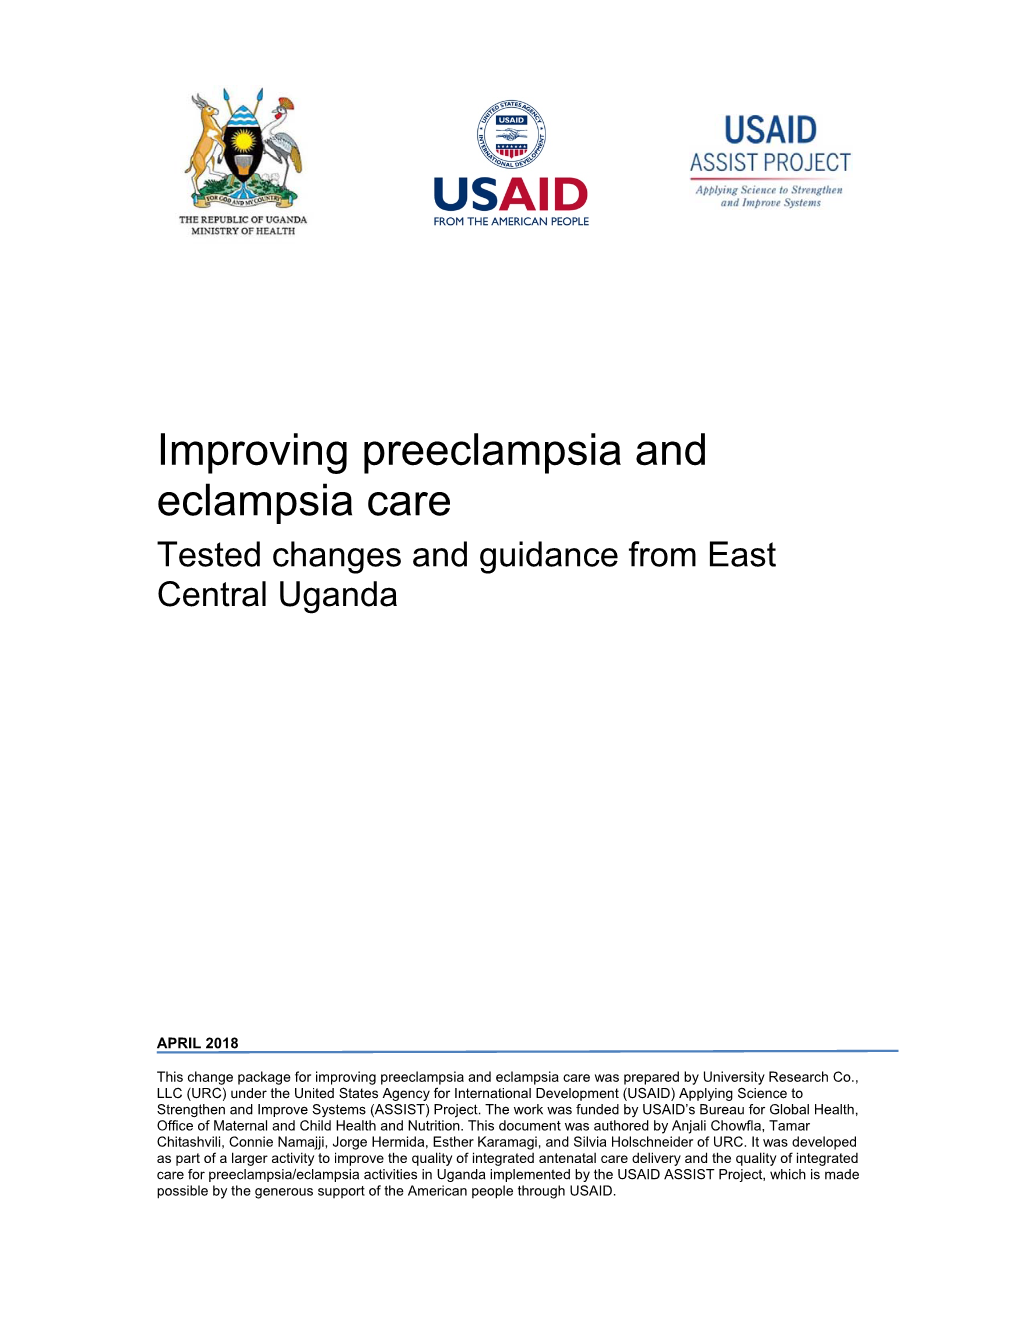 Improving Preeclampsia and Eclampsia Care: Tested Changes and Guidance from East Central Uganda